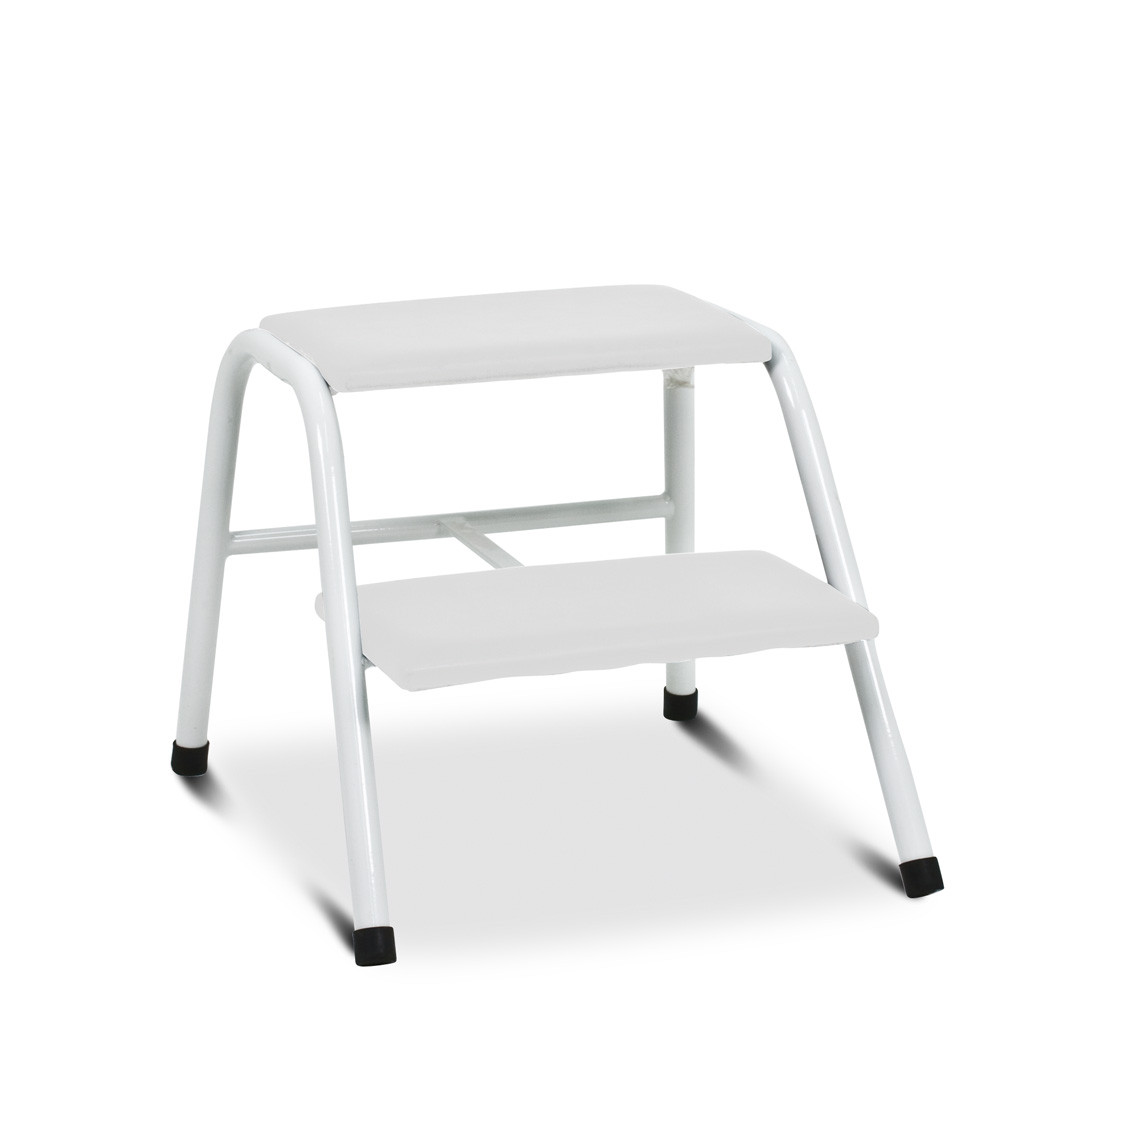 Two-step foot stool with white upholstery